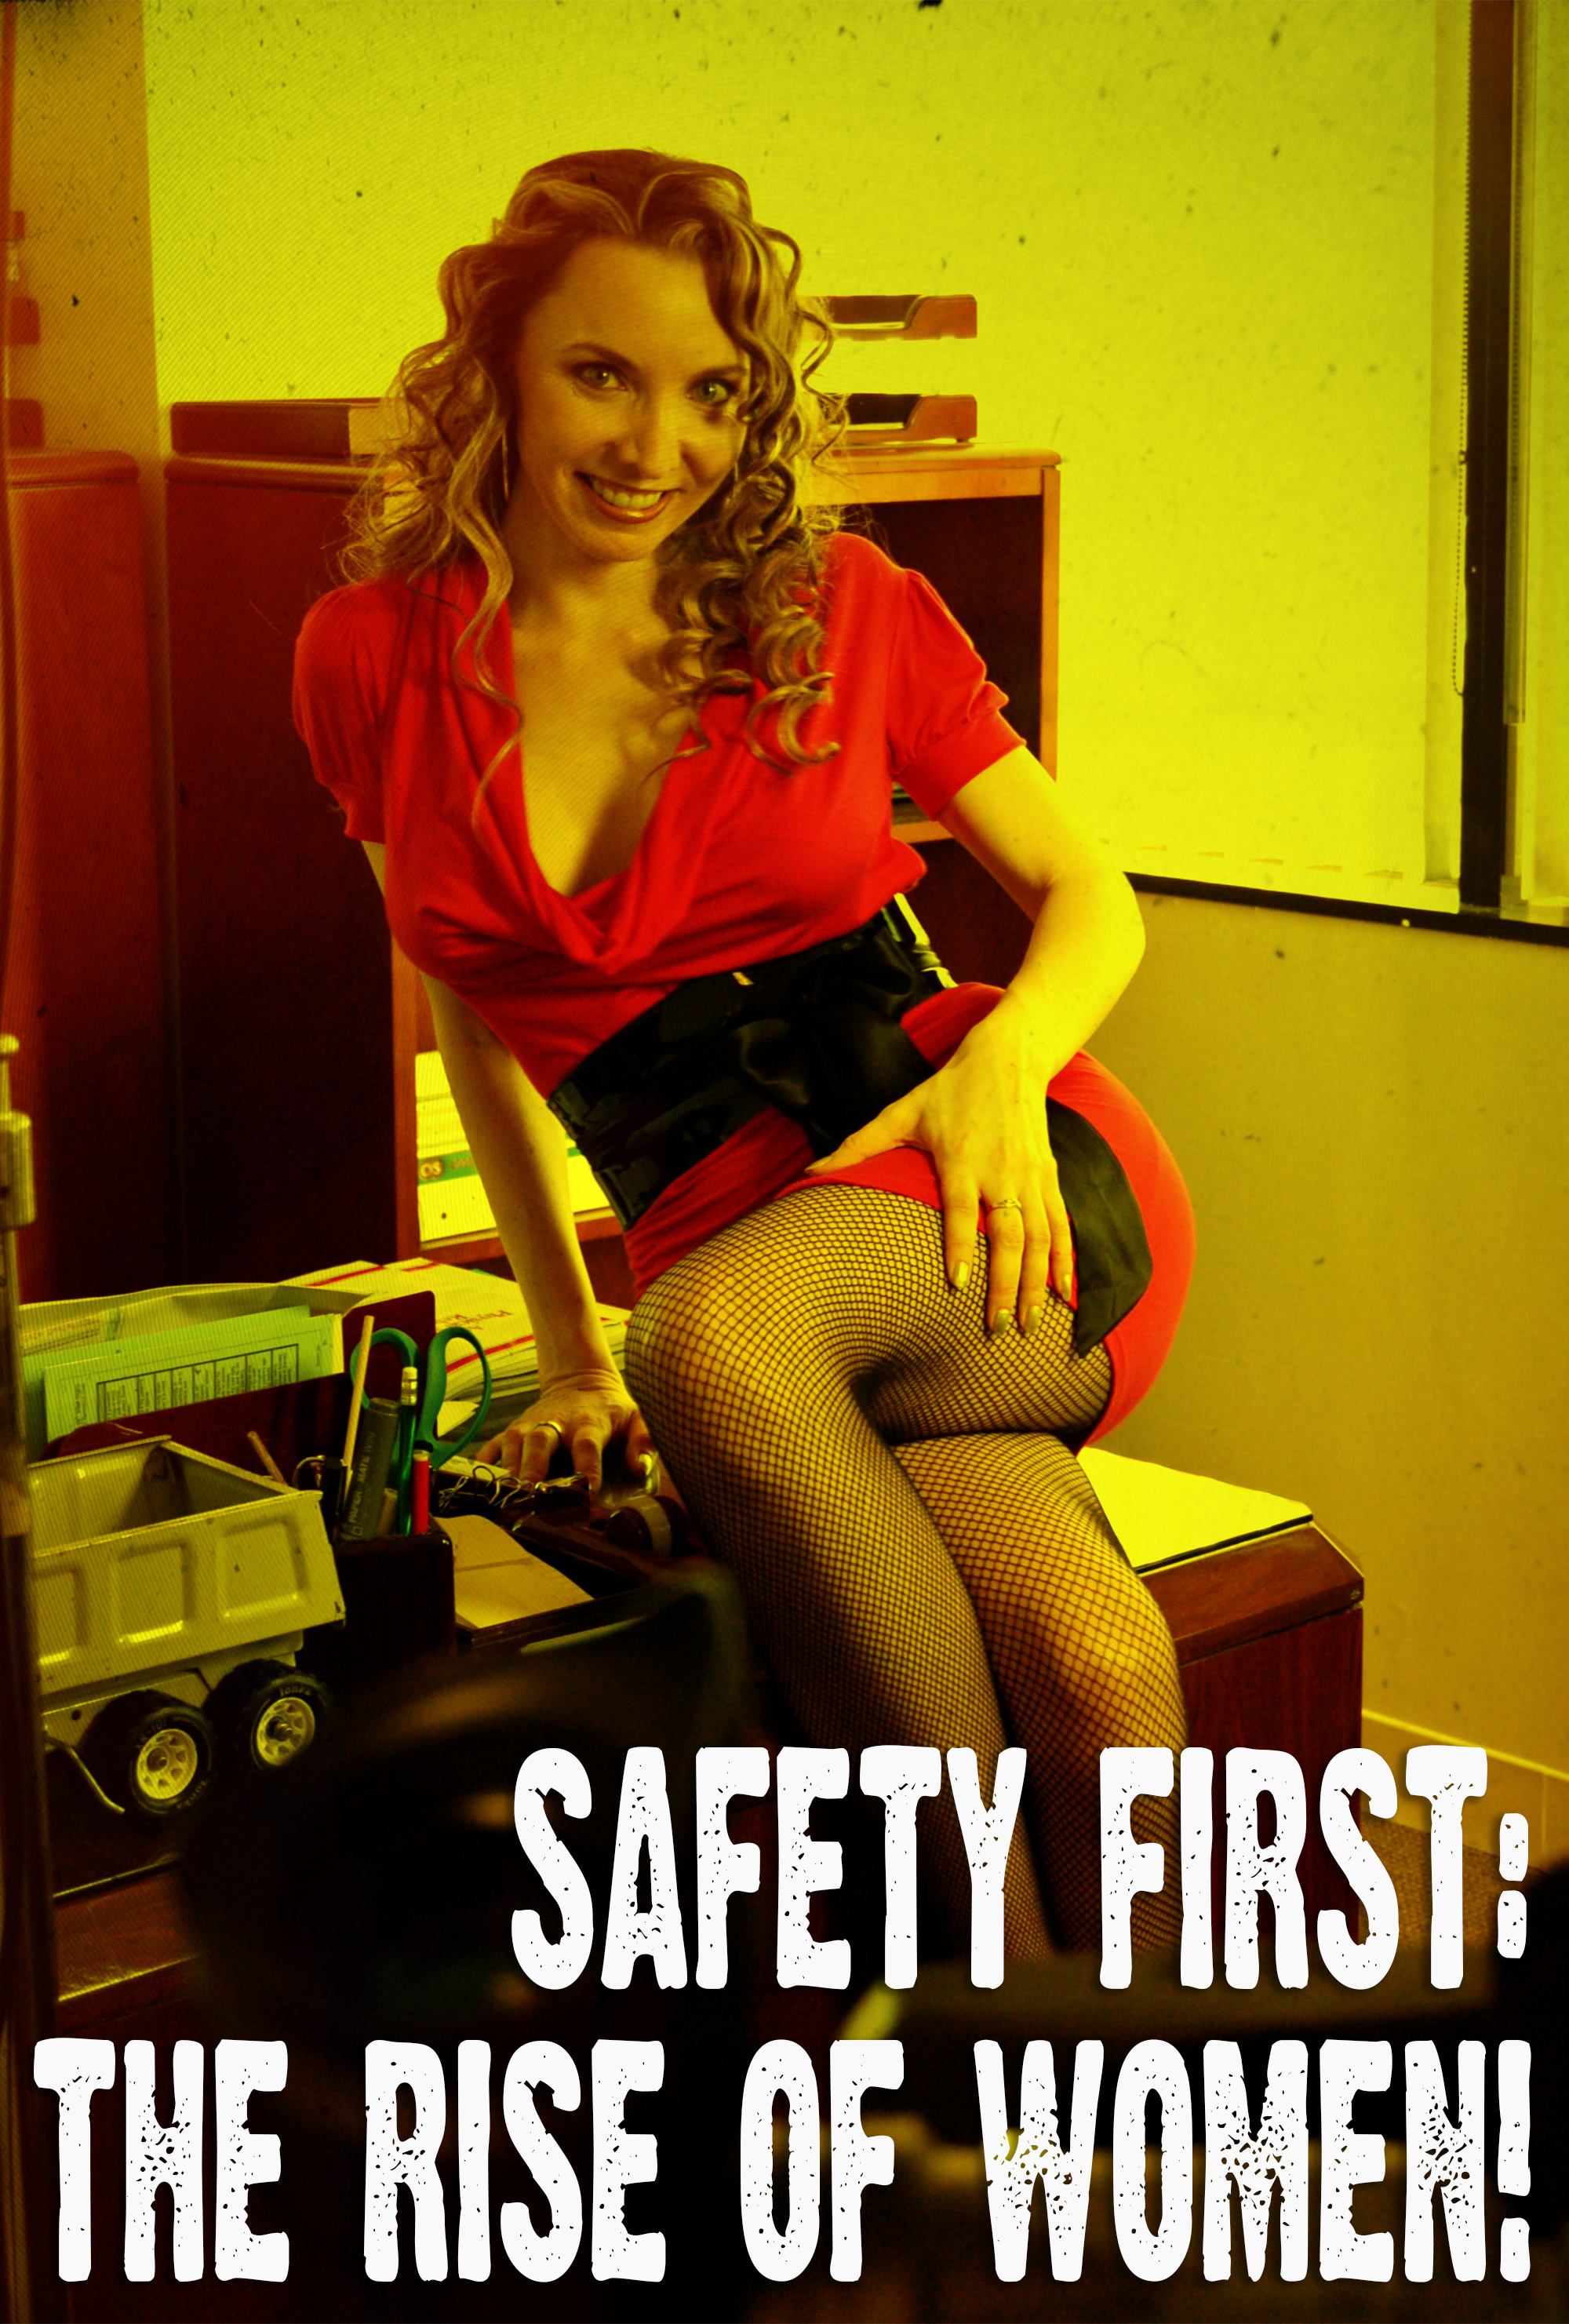 Safety First: The Rise of Women! (2008) Screenshot 1 